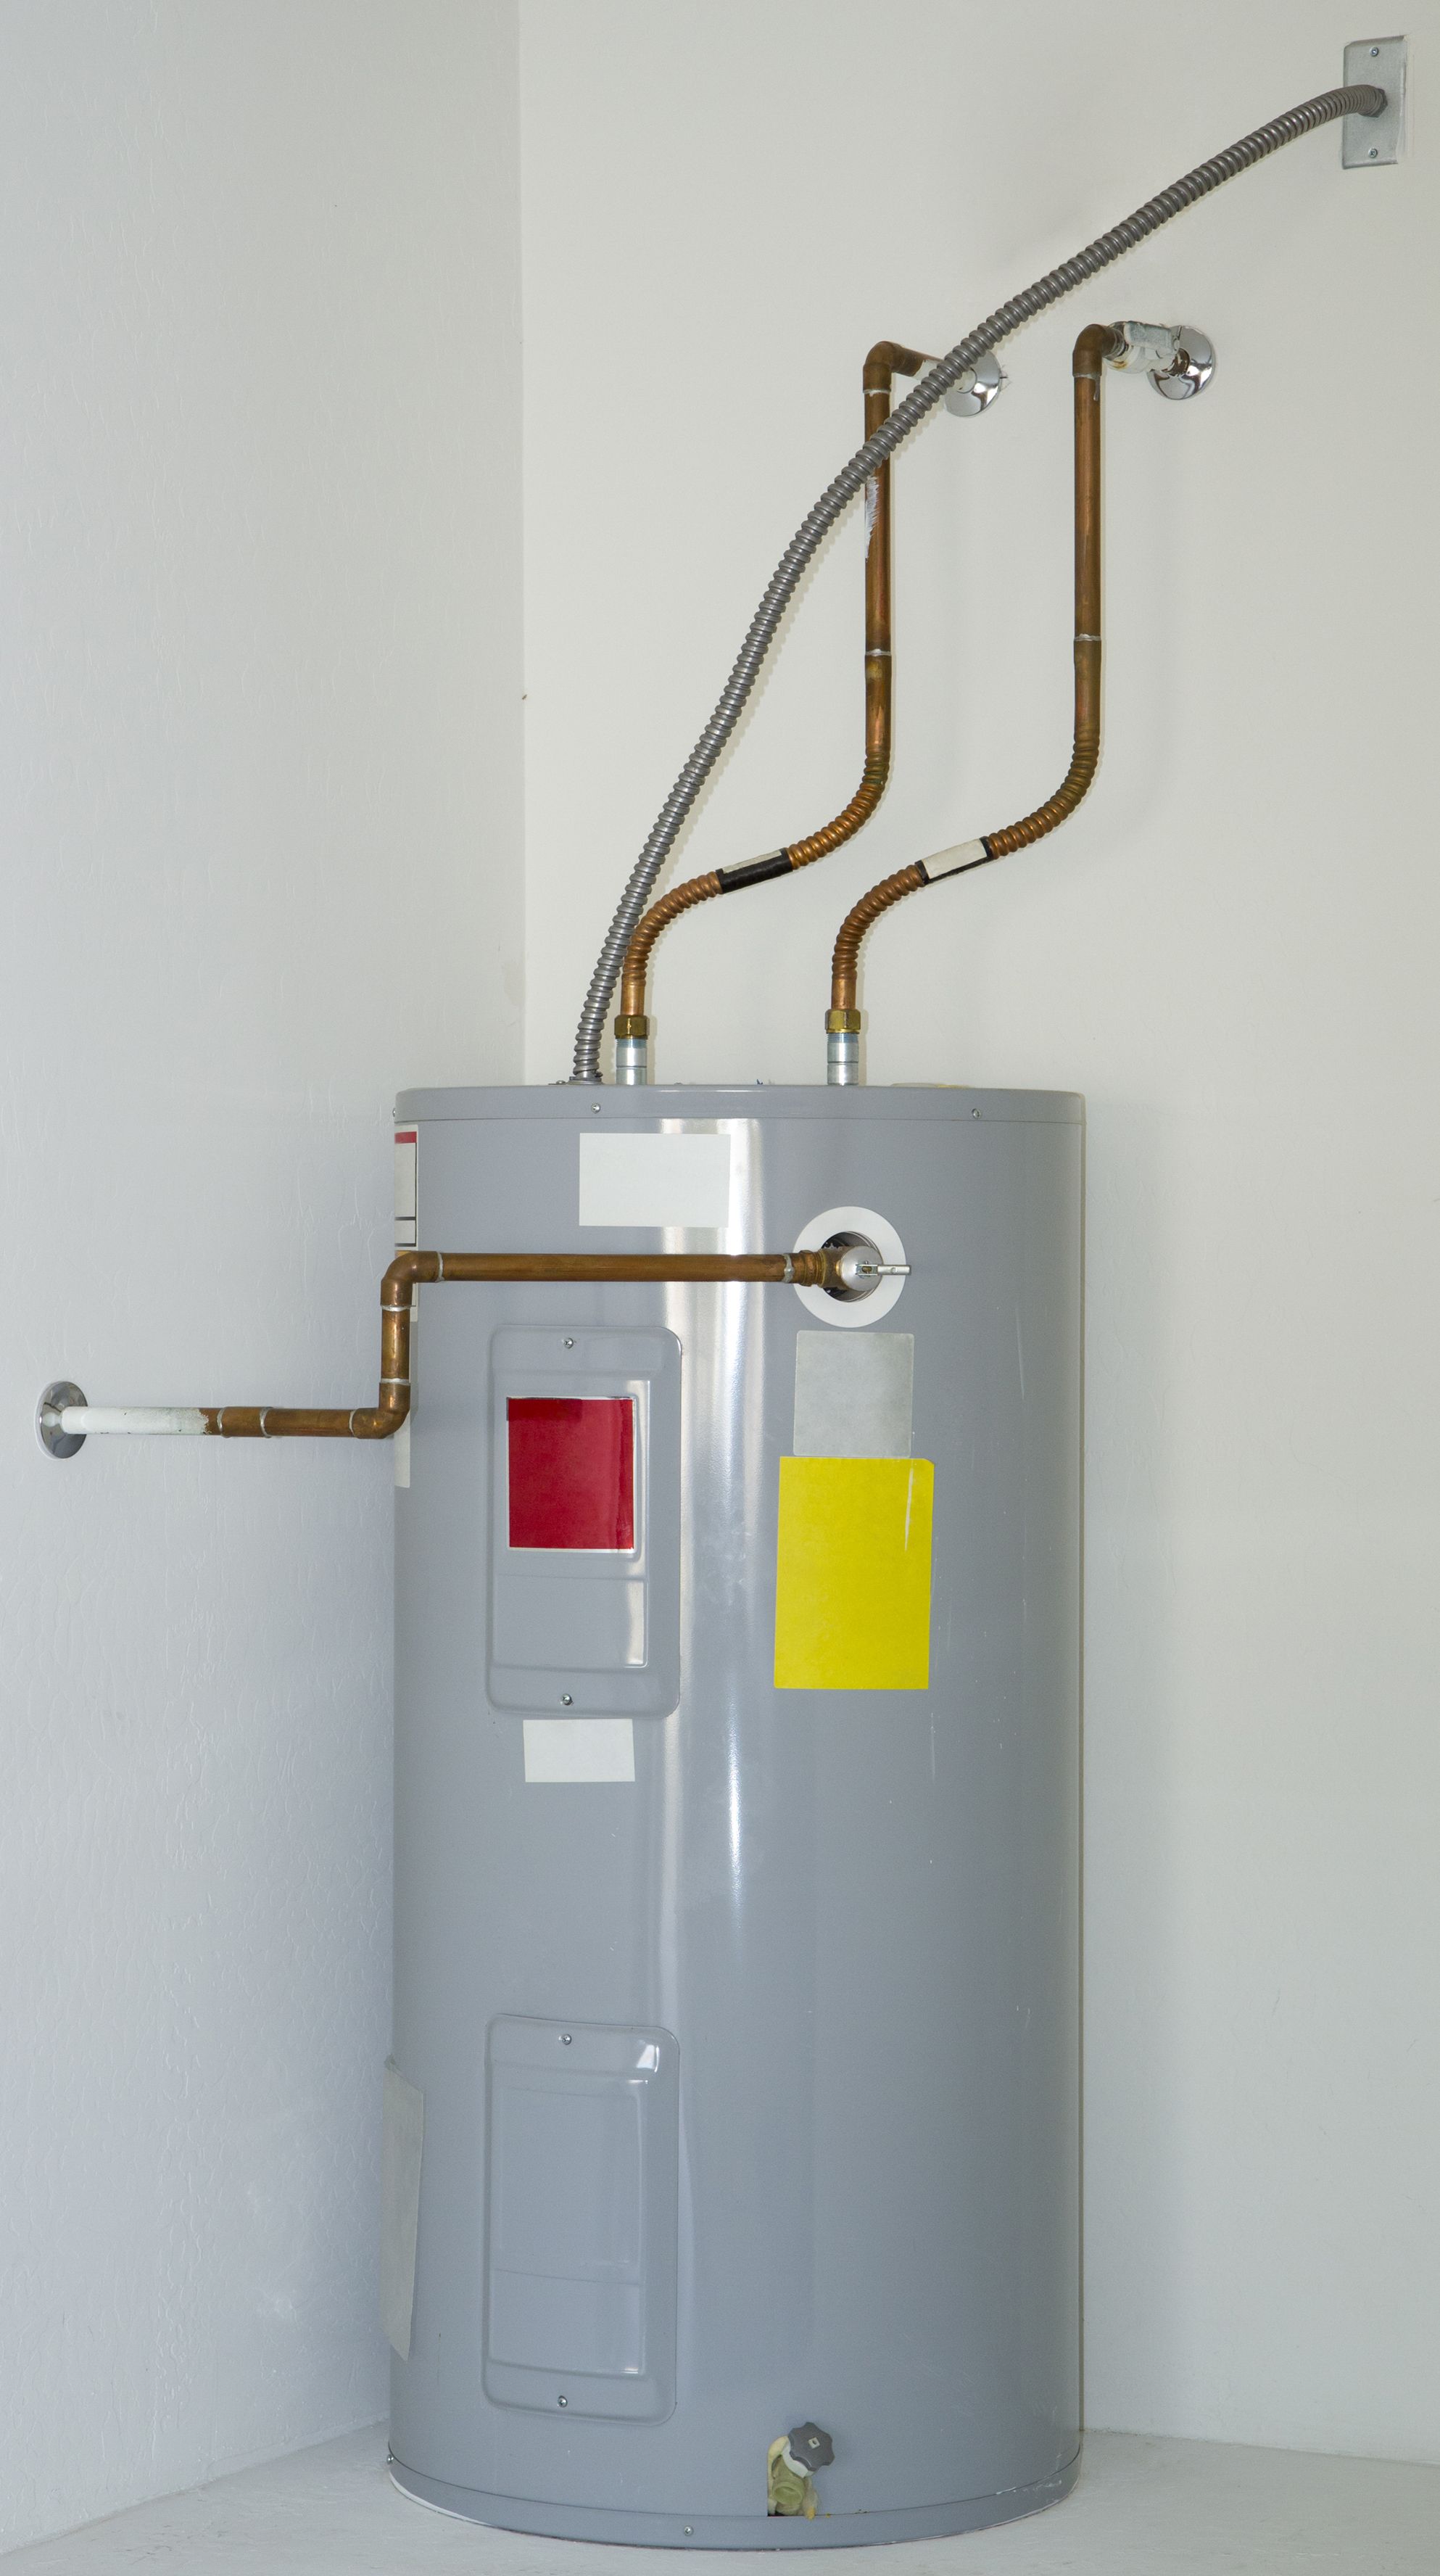 Can You Replace A Gas Hot Water Heater With An Electric One